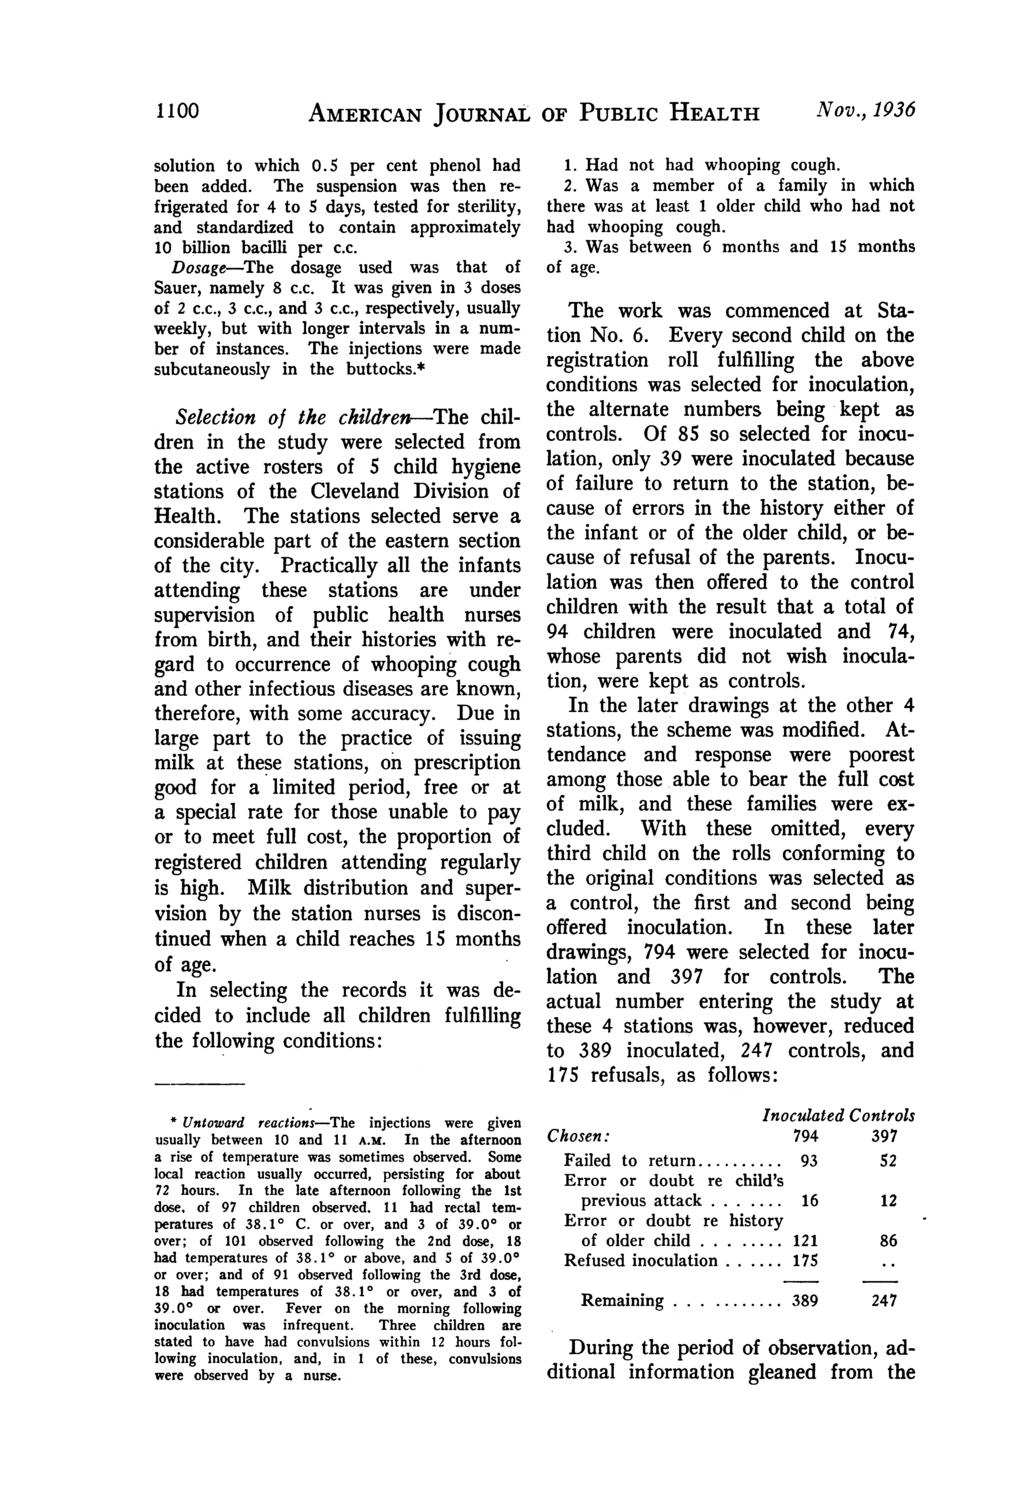 1100 AMERICAN JOURNAL OF PUBLIC HEALTH NVov., 1936 solution to which 0.5 per cent phenol had been added.